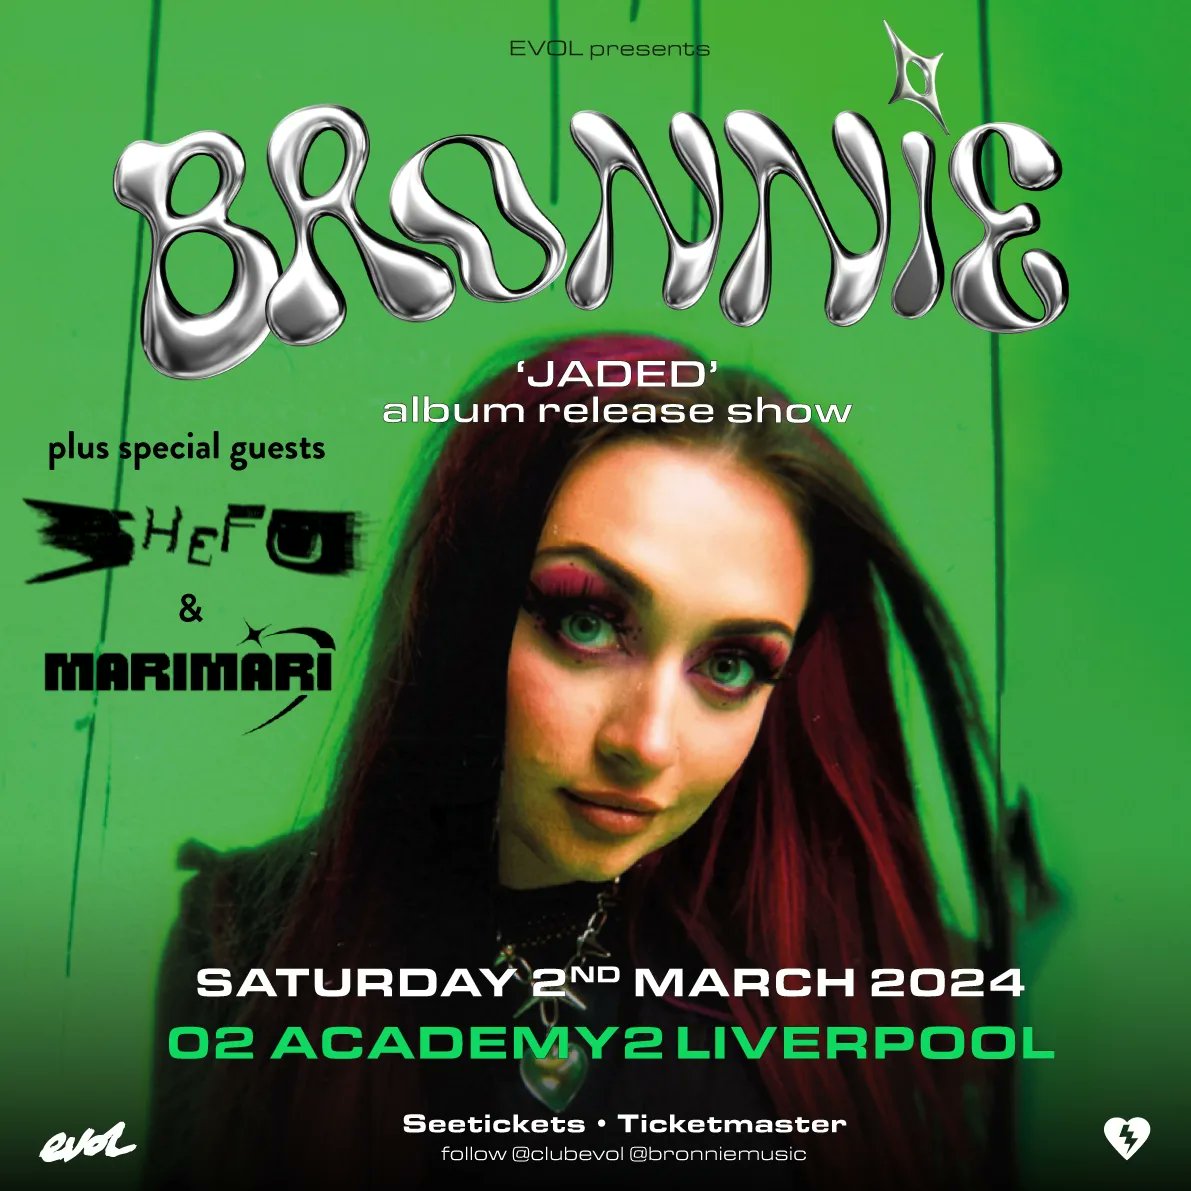 𝐅𝐑𝐄𝐒𝐇𝐋𝐘 𝐀𝐍𝐍𝐎𝐔𝐍𝐂𝐄𝐃 Electrifying alt-rockers @ShefuBand and the emo hyperpop of MARiMARi are special guests at @BronnieMusic's 'Jaded' album release show at @O2AcademyLpool, Saturday March 2nd 🔥 VIP, Meet & Greet + general admission 👇 seetickets.com/event/bronnie/…